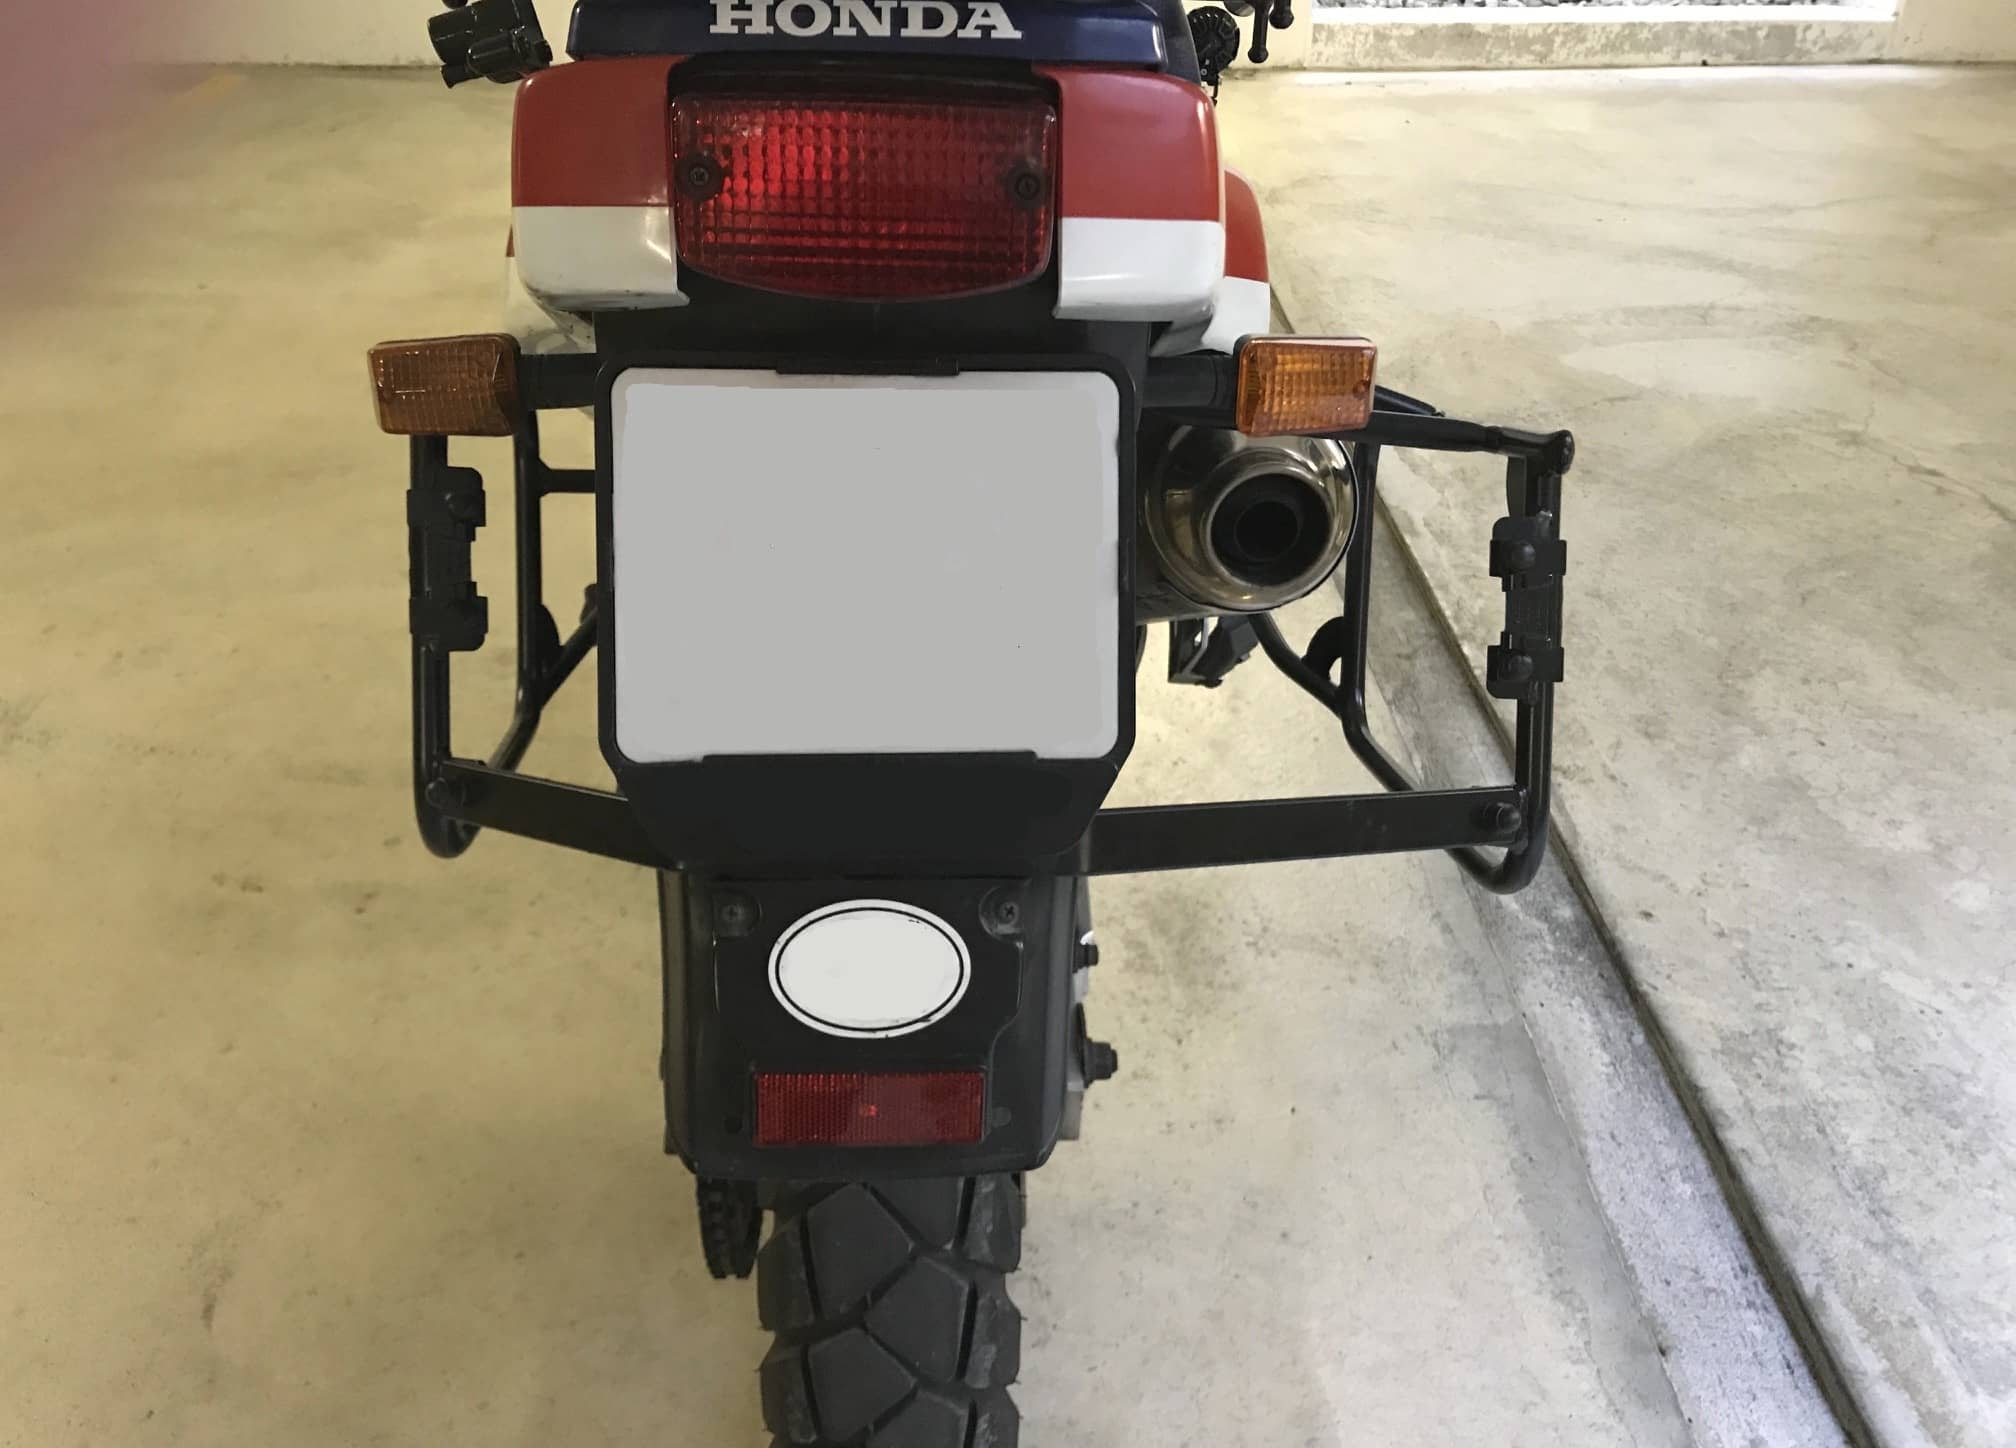 Sidecarrier permanent mounted black for Honda Africa Twin XRV 650 (1988-1990)